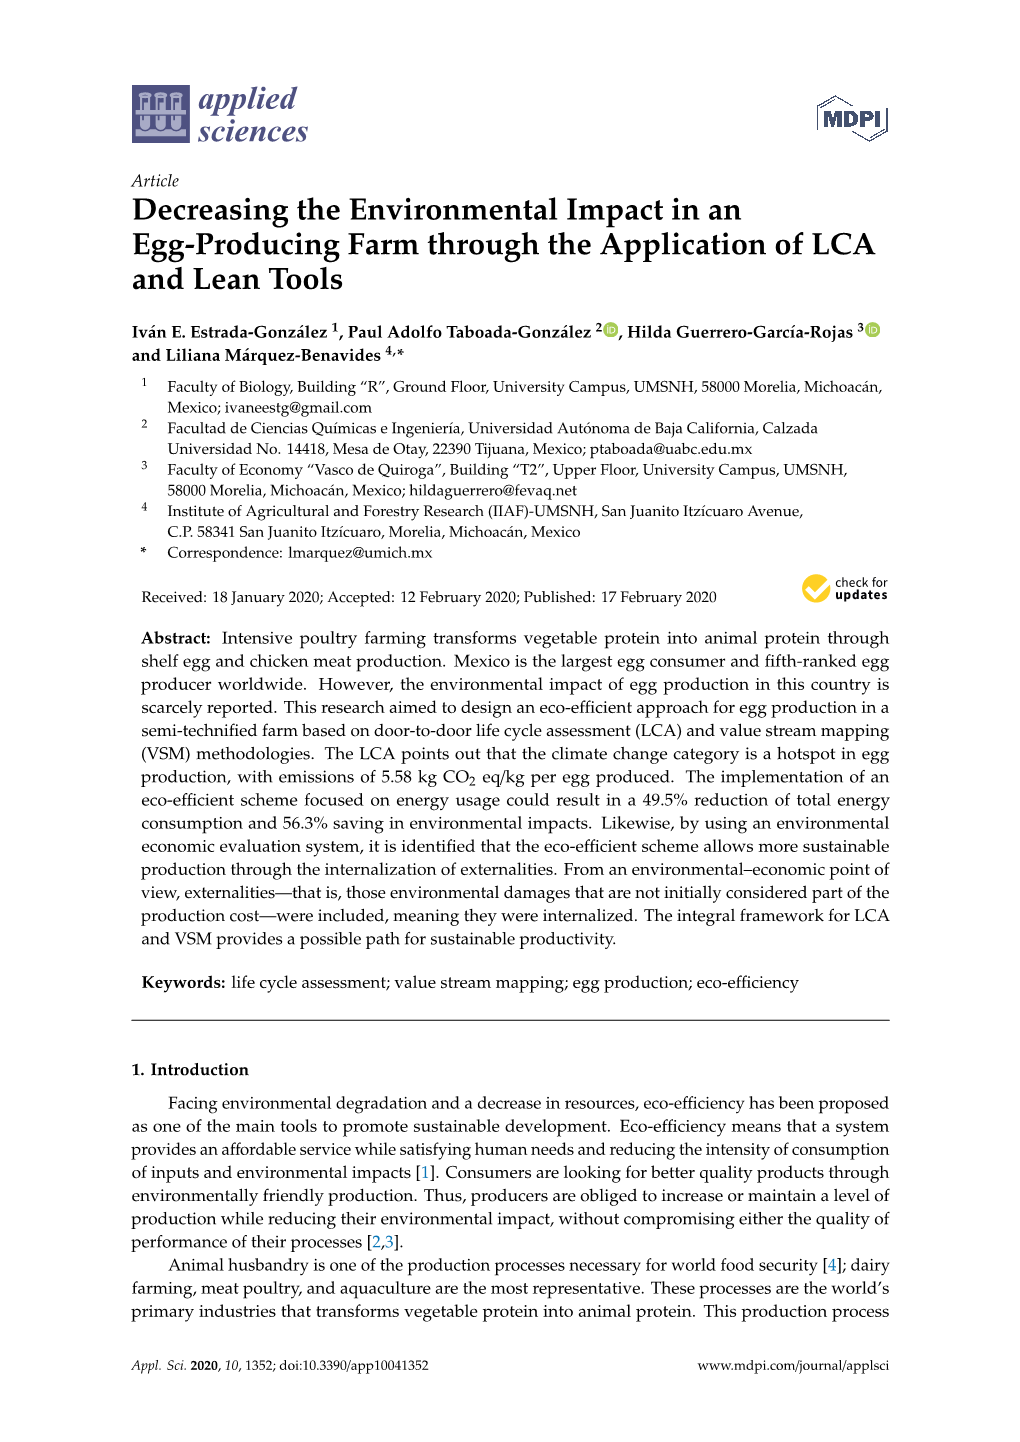 Decreasing the Environmental Impact in an Egg-Producing Farm Through the Application of LCA and Lean Tools